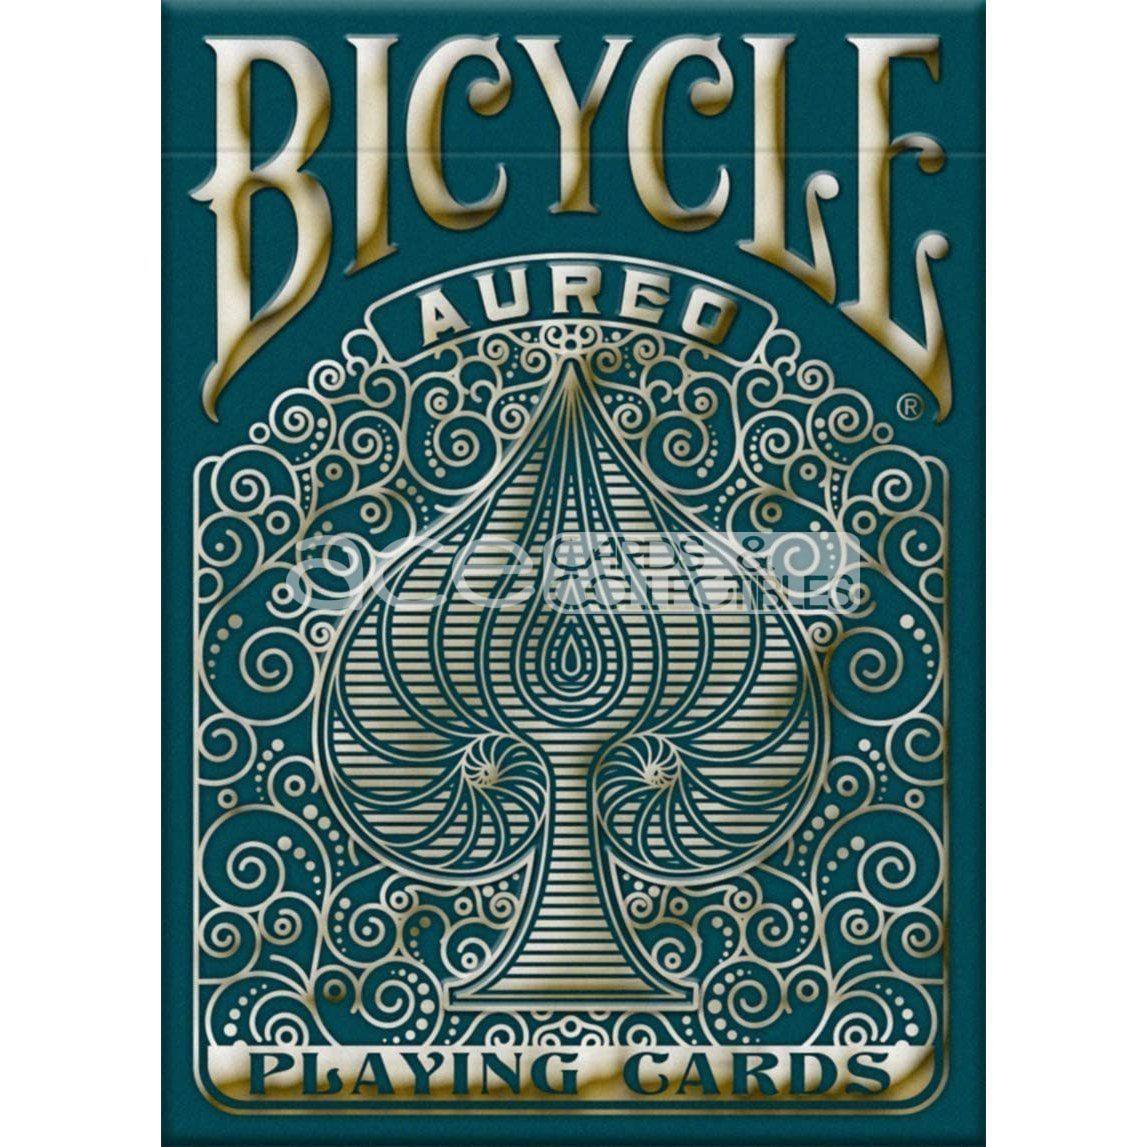 Bicycle Aureo Playing Cards-United States Playing Cards Company-Ace Cards & Collectibles